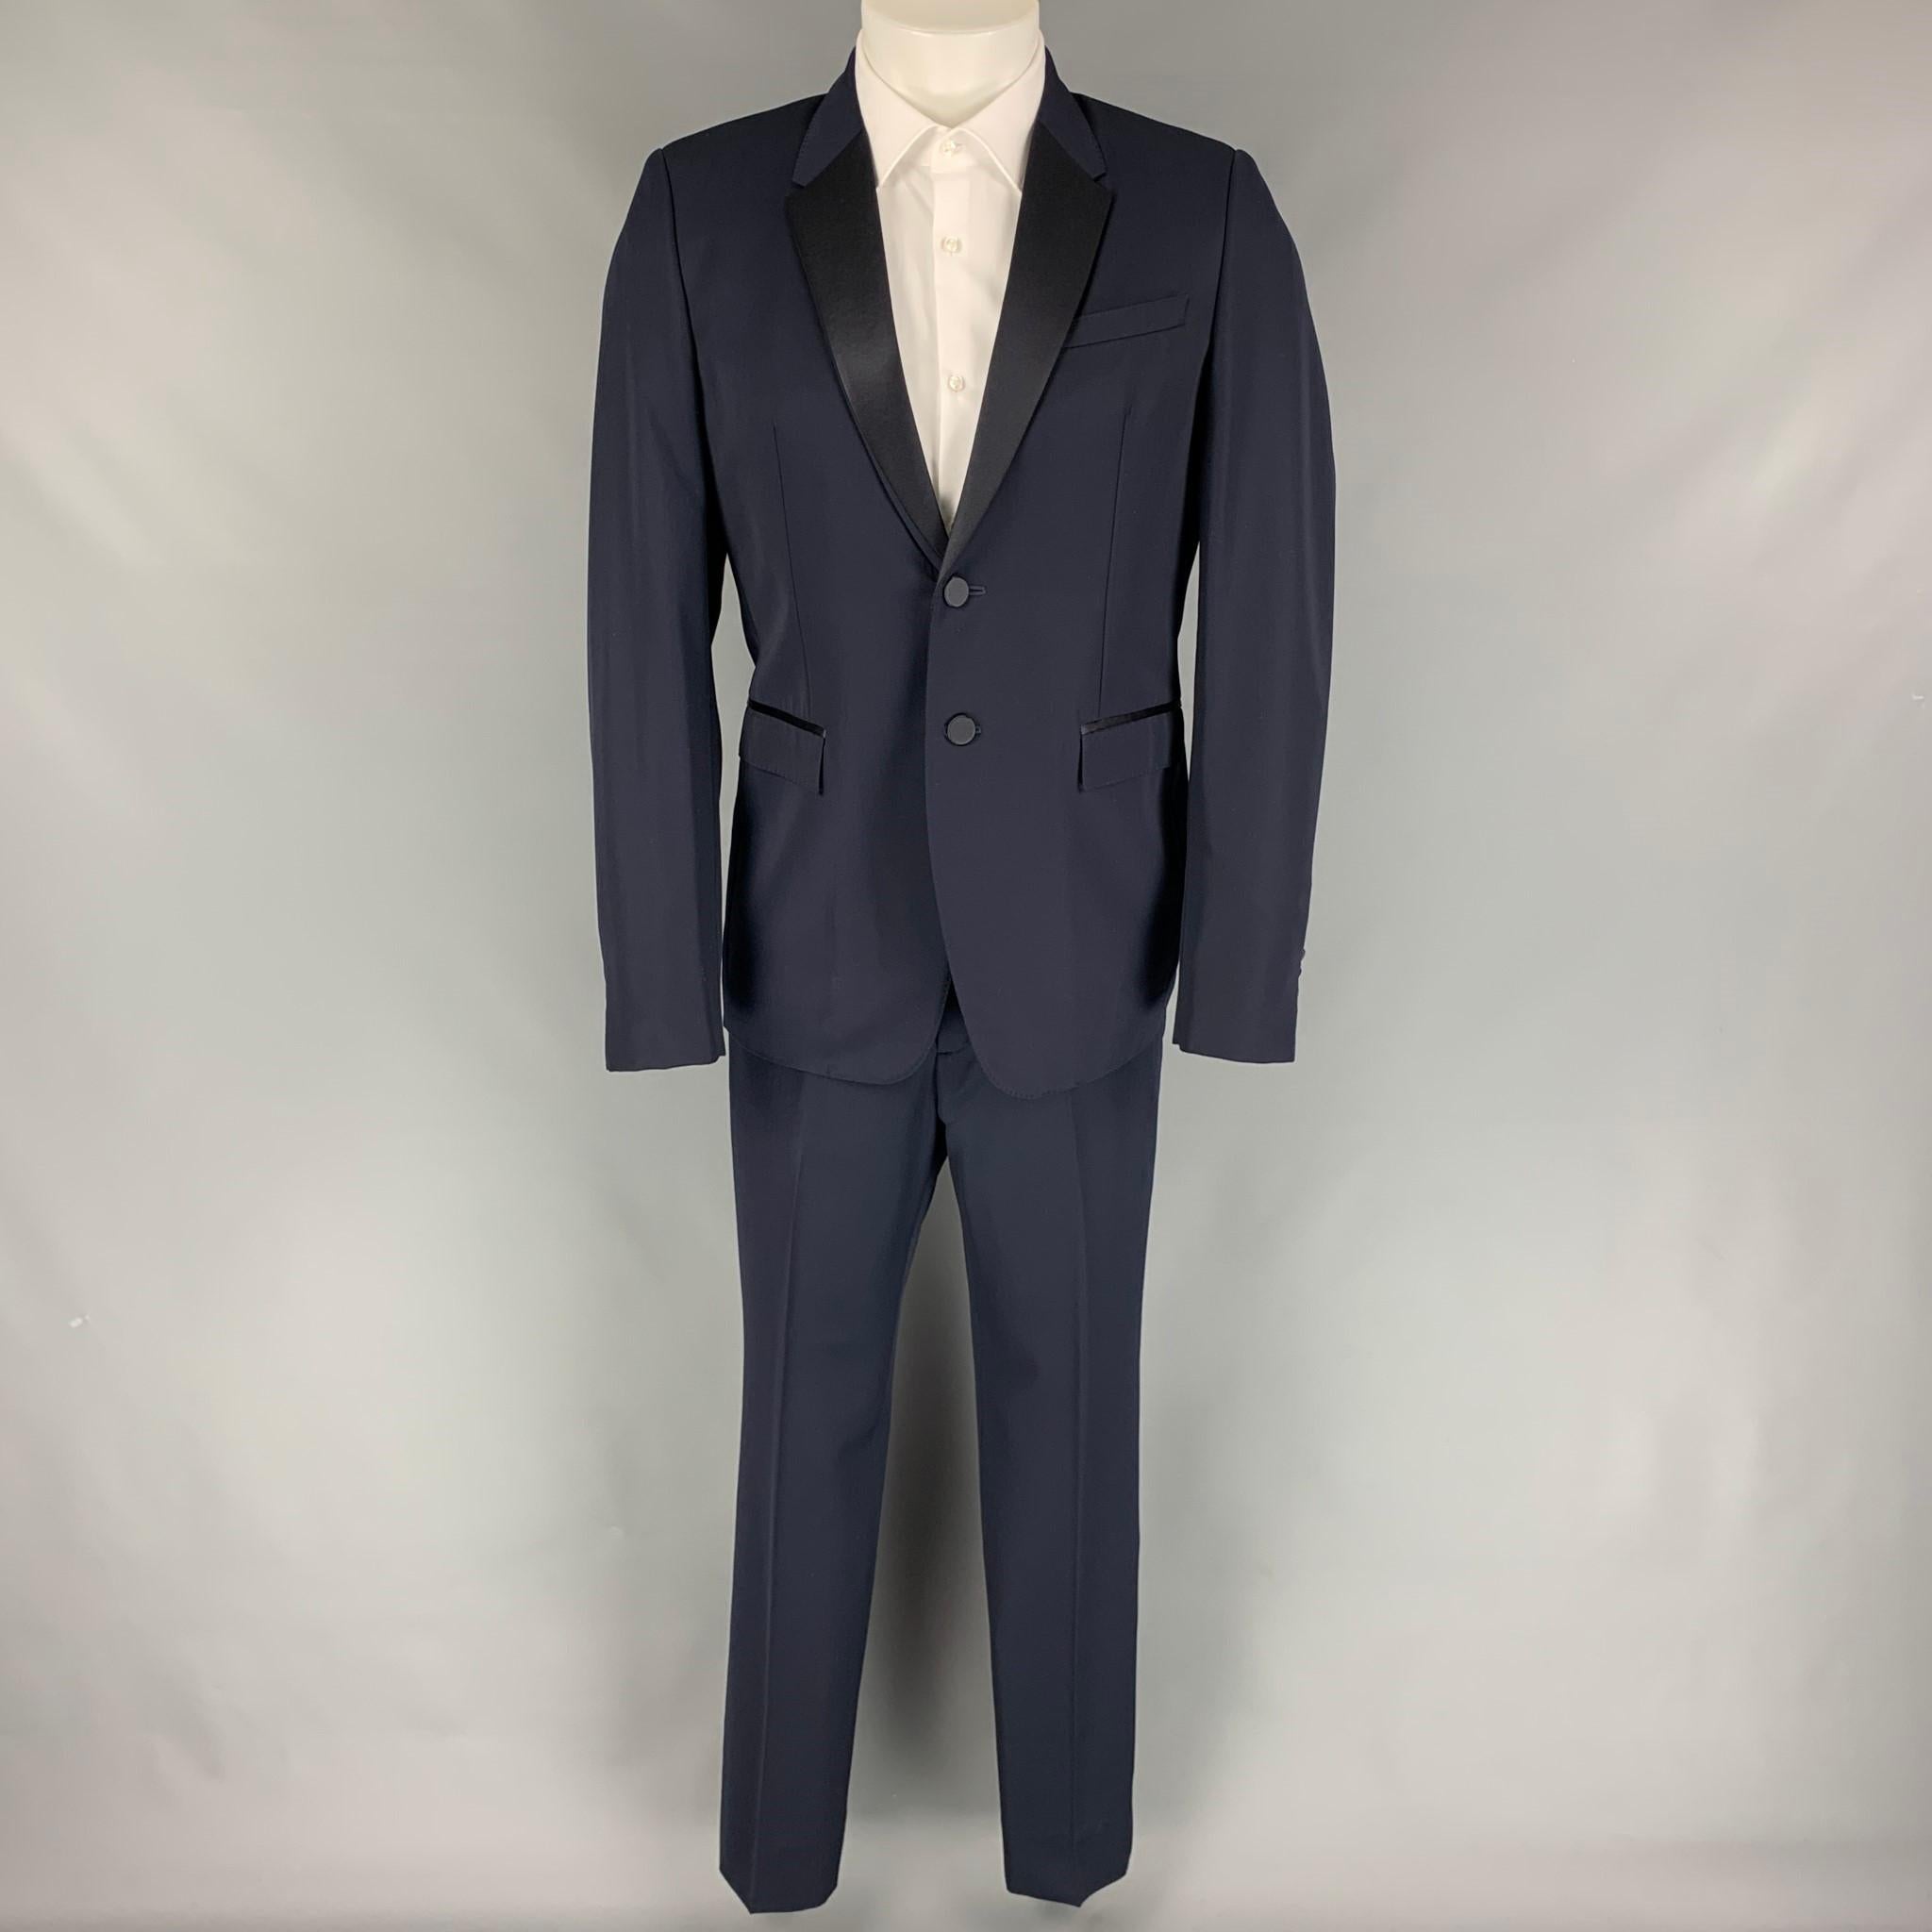 BURBERRY PRORSUM tuxedo suit comes in a navy blue virgin wool with a full liner and includes a single breasted, double button sport coat with a notch lapel and matching flat front trousers. Made in Italy.

Excellent Pre-Owned Condition.
Marked: